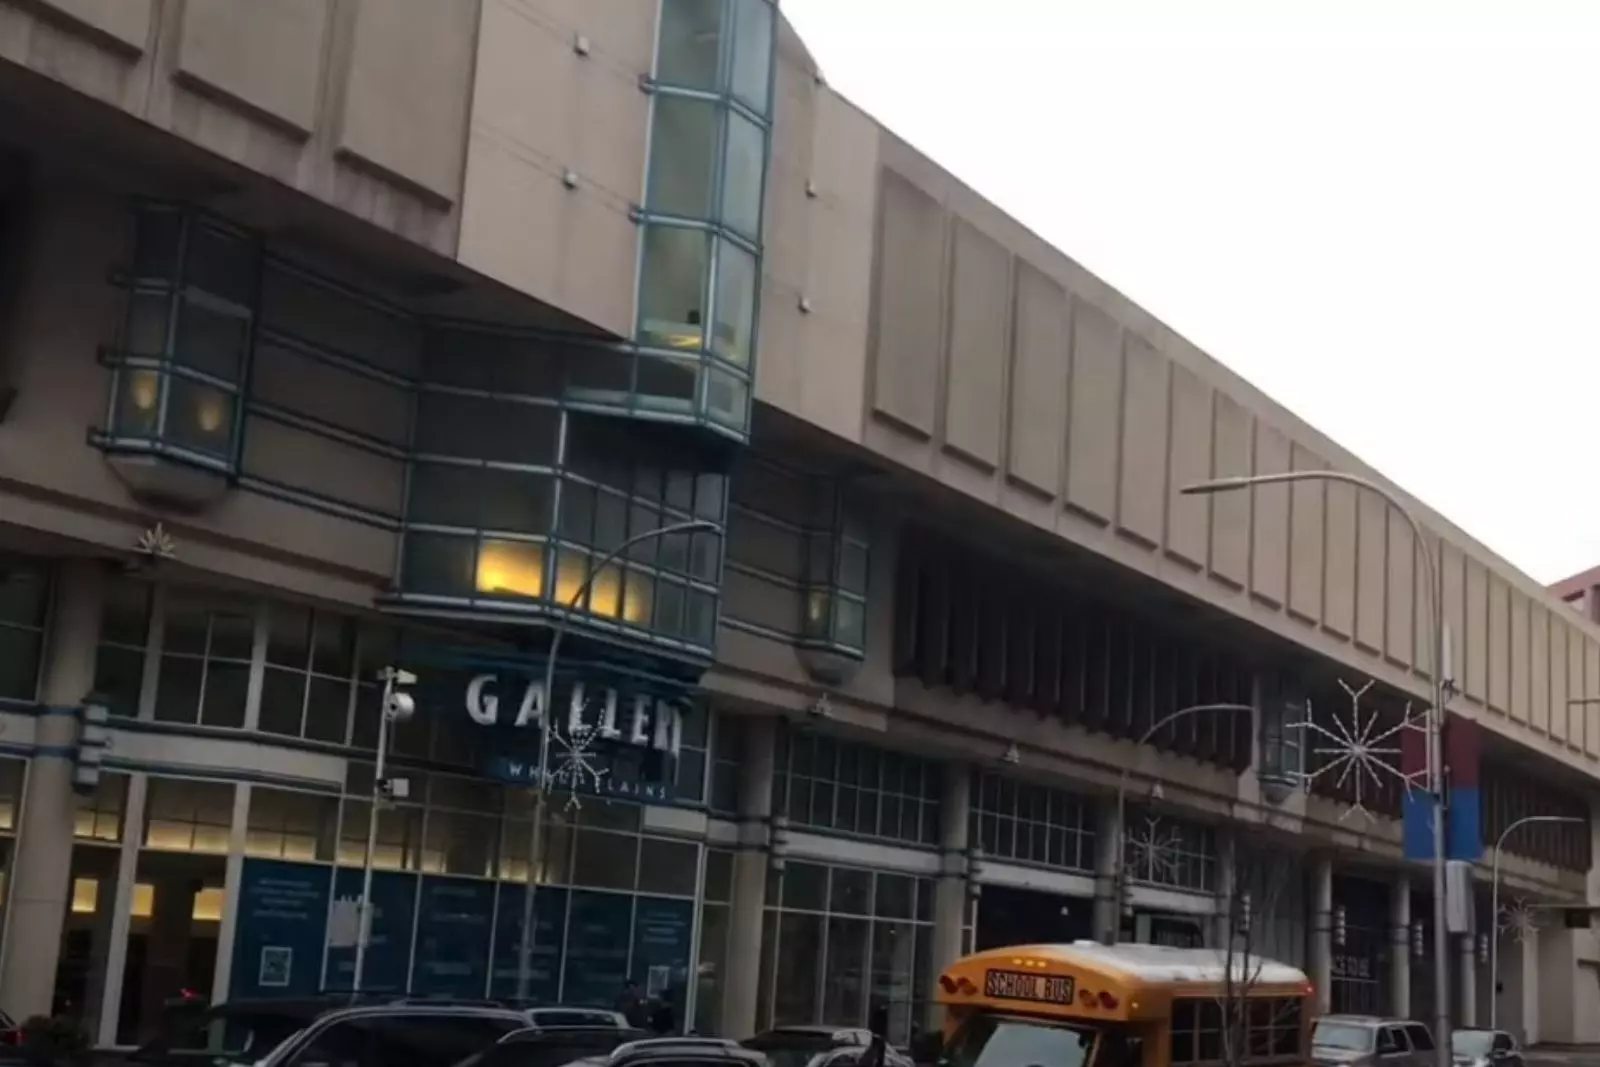 Poughkeepsie Galleria to close along with all malls, bowling alleys